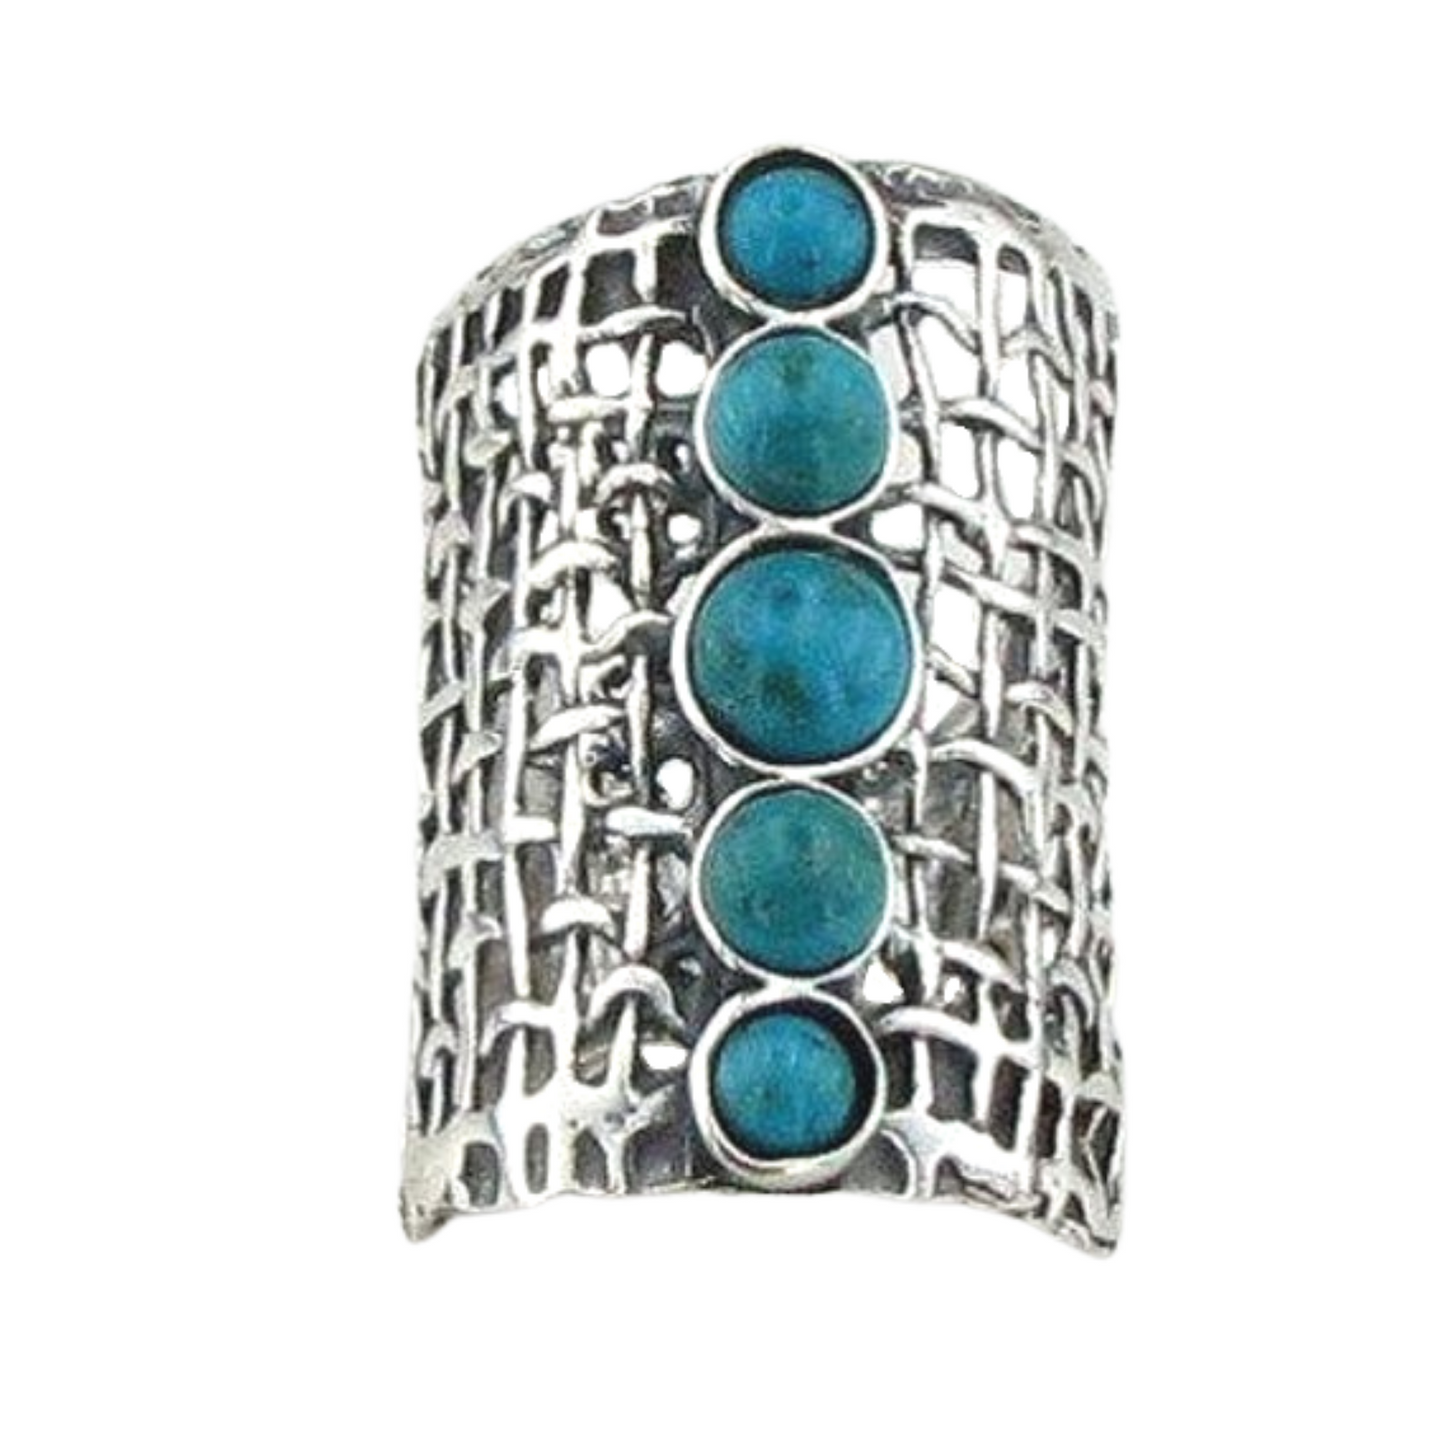 Long Sterling Silver ring with Natural Turquoise Gemstones, 5 gems ring